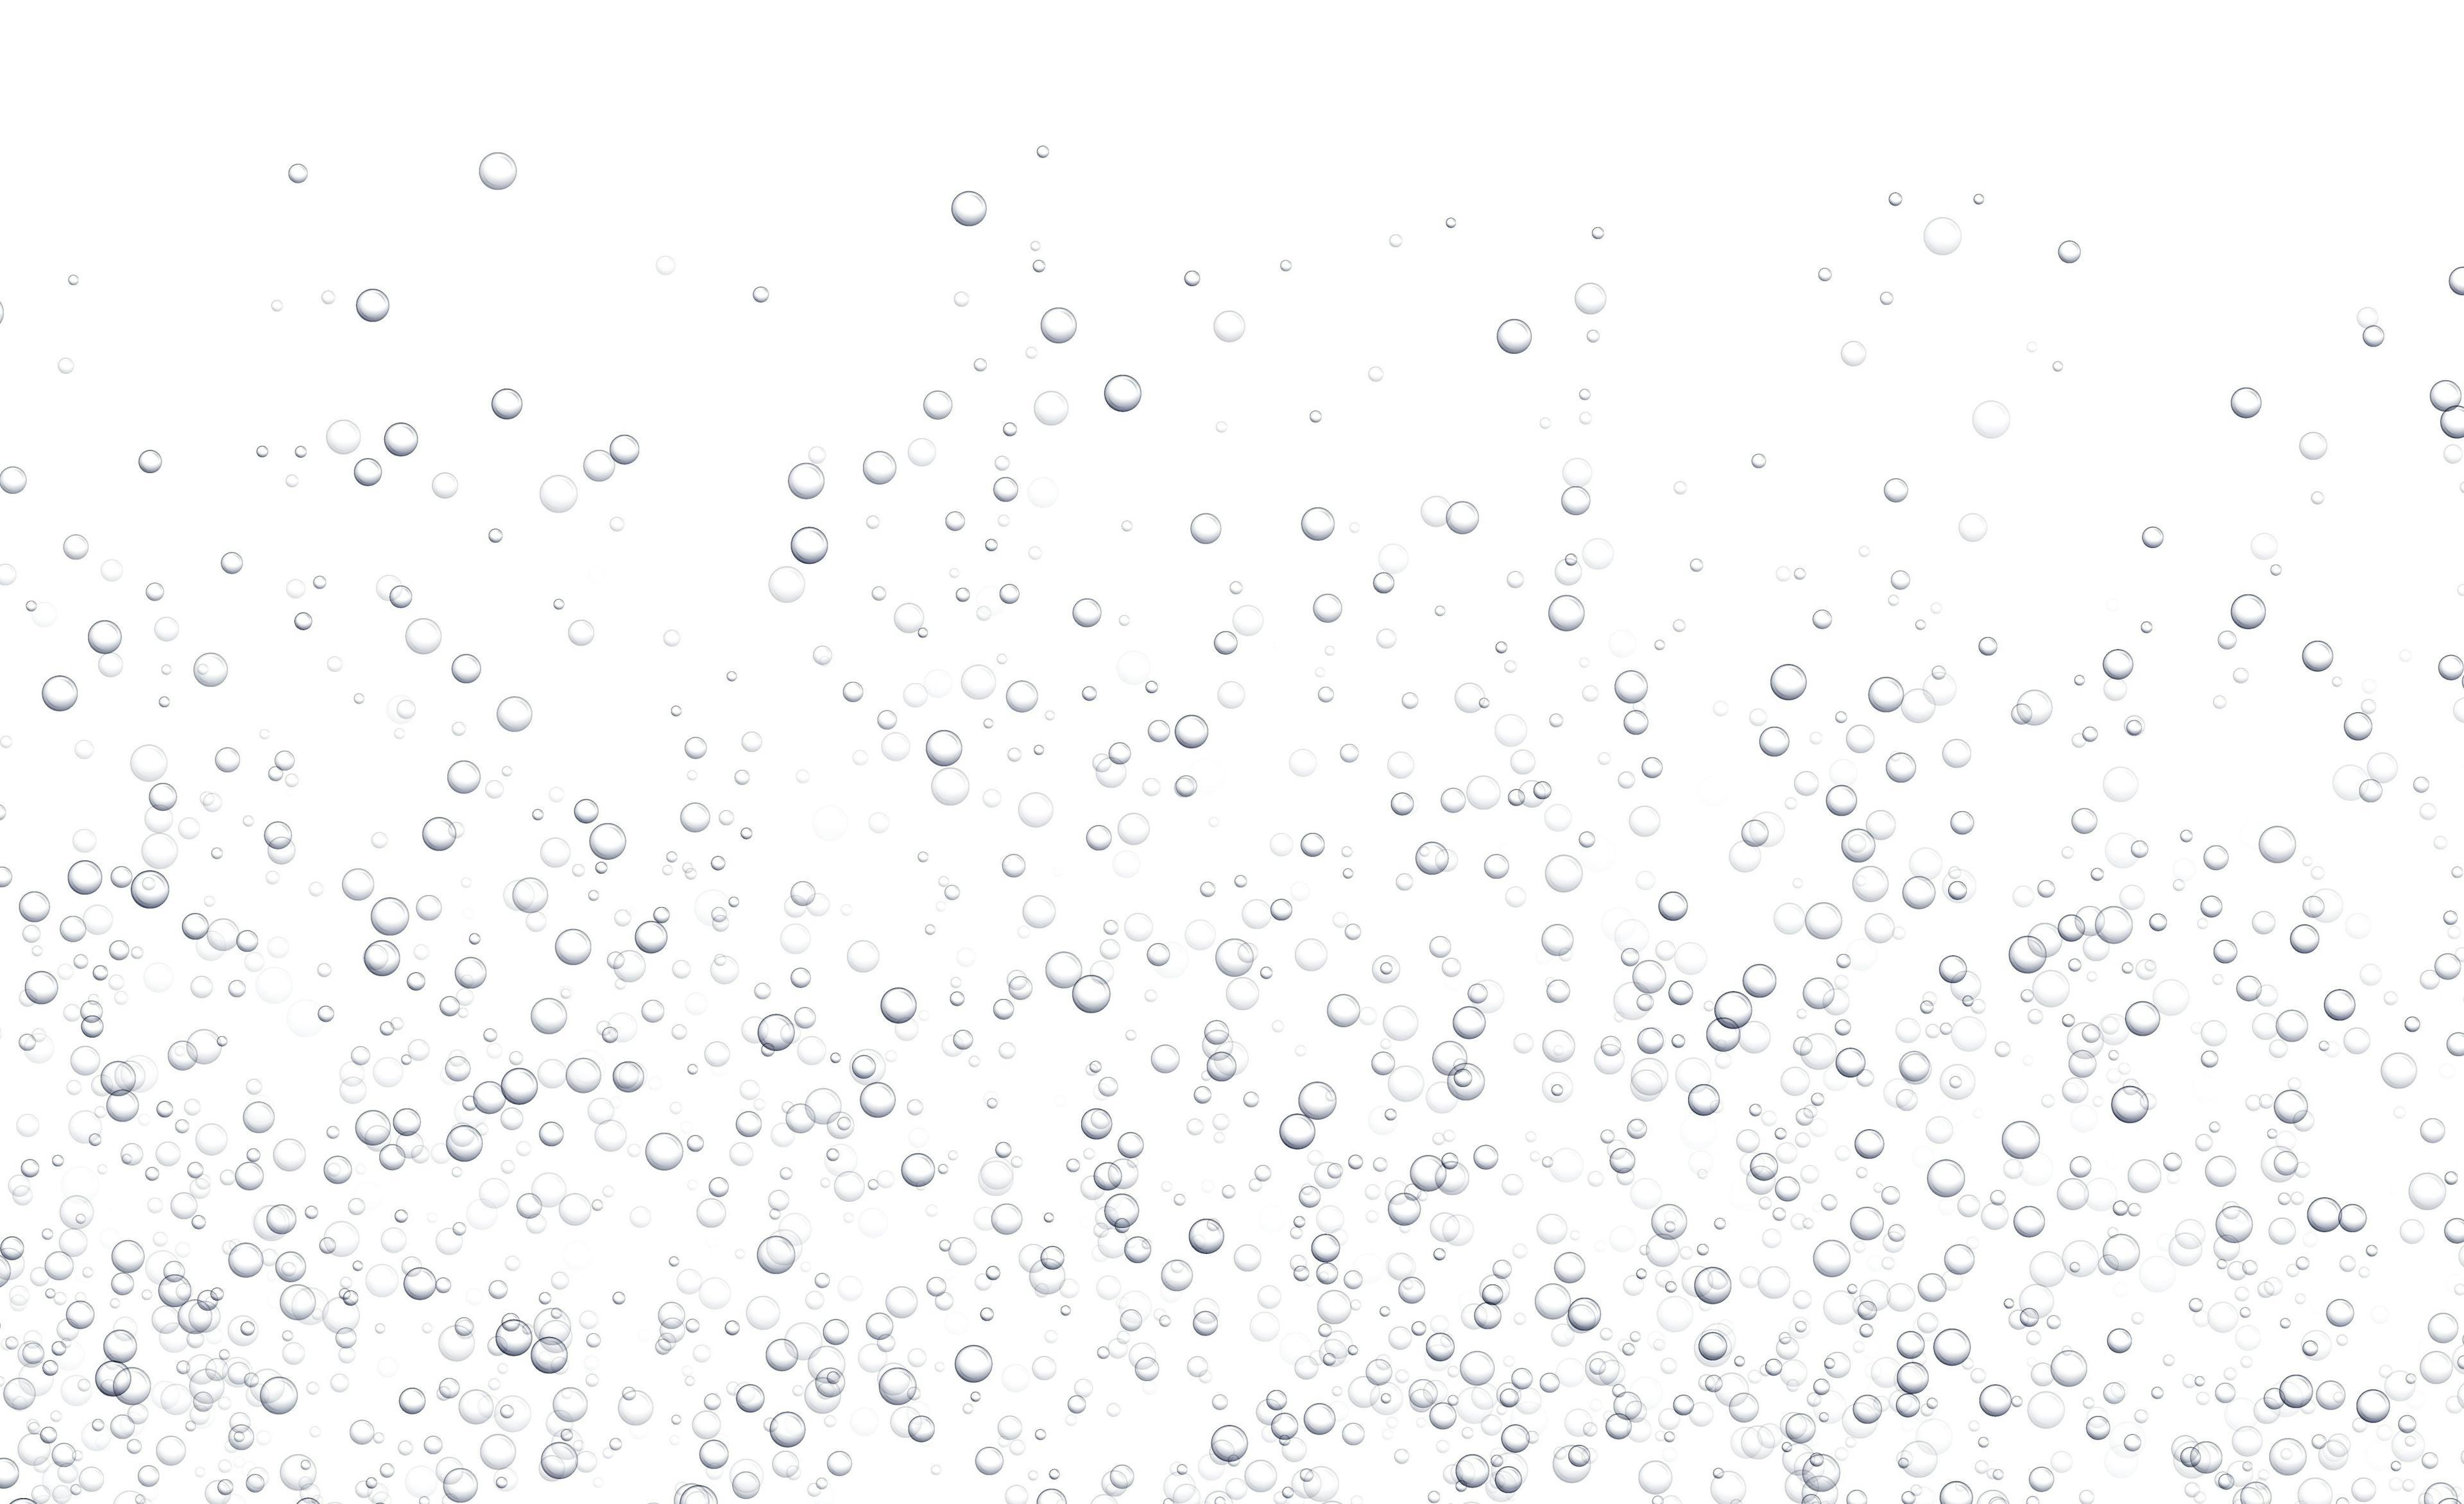 Underwater fizzing bubbles, soda or champagne carbonated drink, sparkling water isolated on white background. Effervescent drink. Aquarium, sea, ocean bubbles vector . | Image Credit: © Likanaris - stock.adobe.com